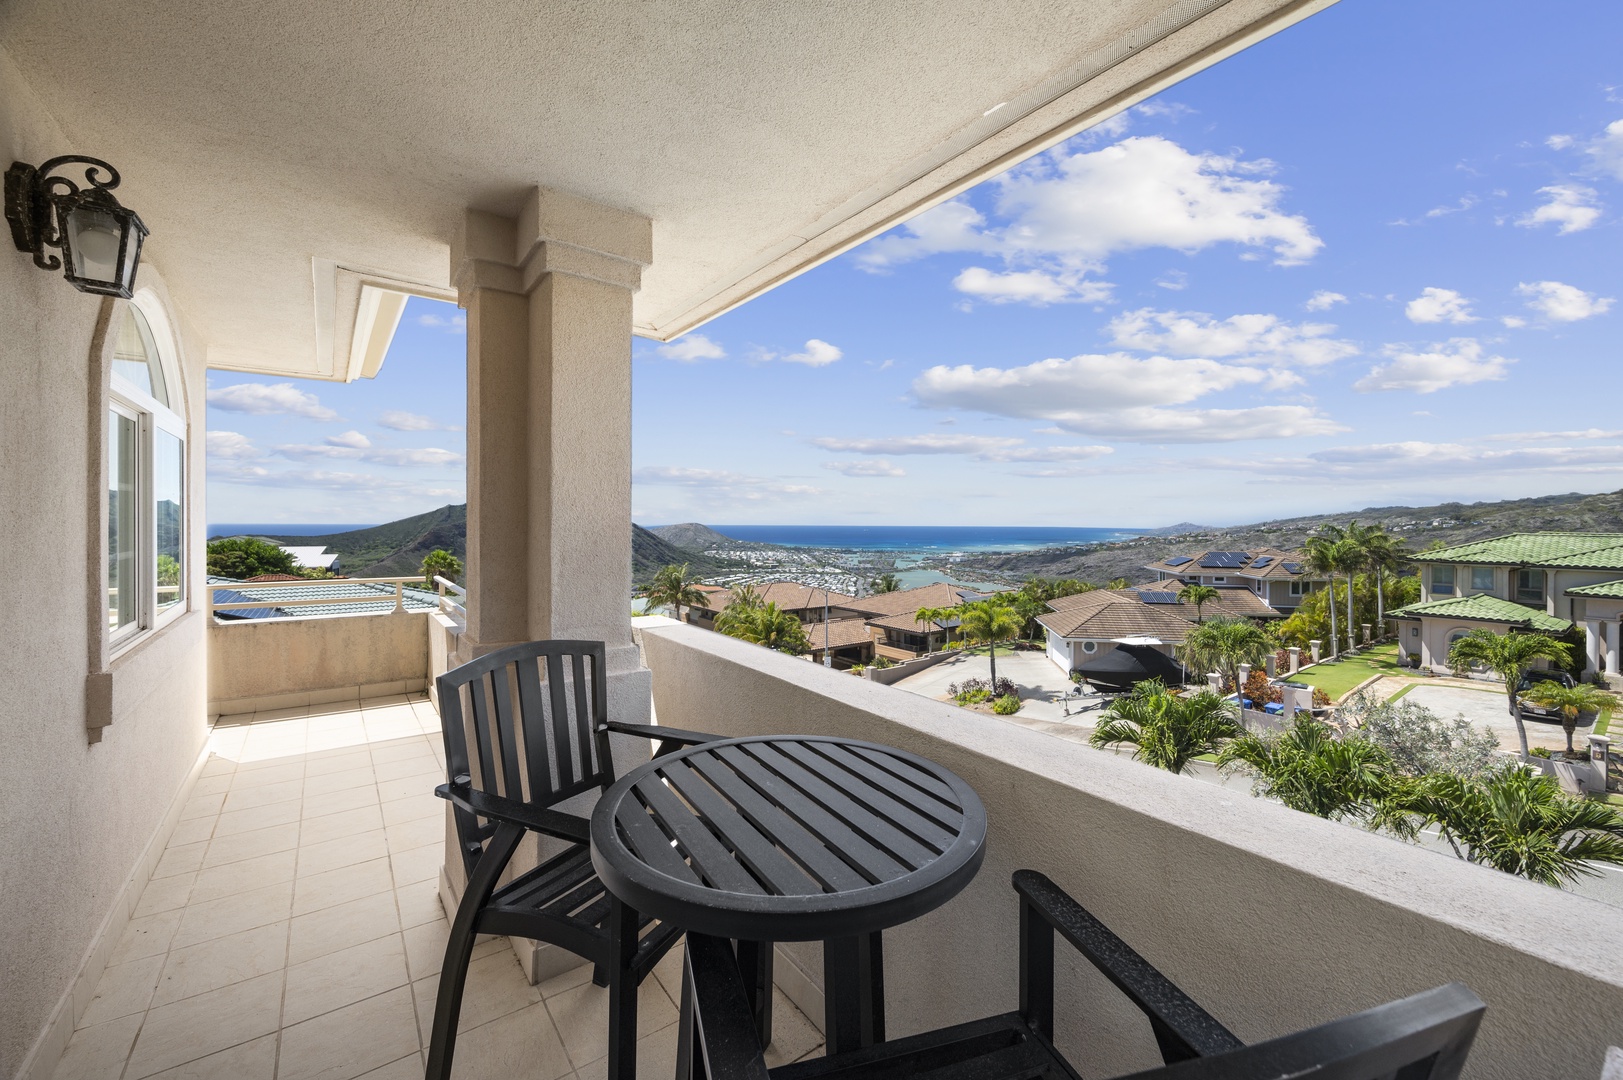 Honolulu Vacation Rentals, Lotus on a Hill* - From the Primary Bedroom, enjoy access to an expansive lanai with hightop seating as well as ocean and mountain views